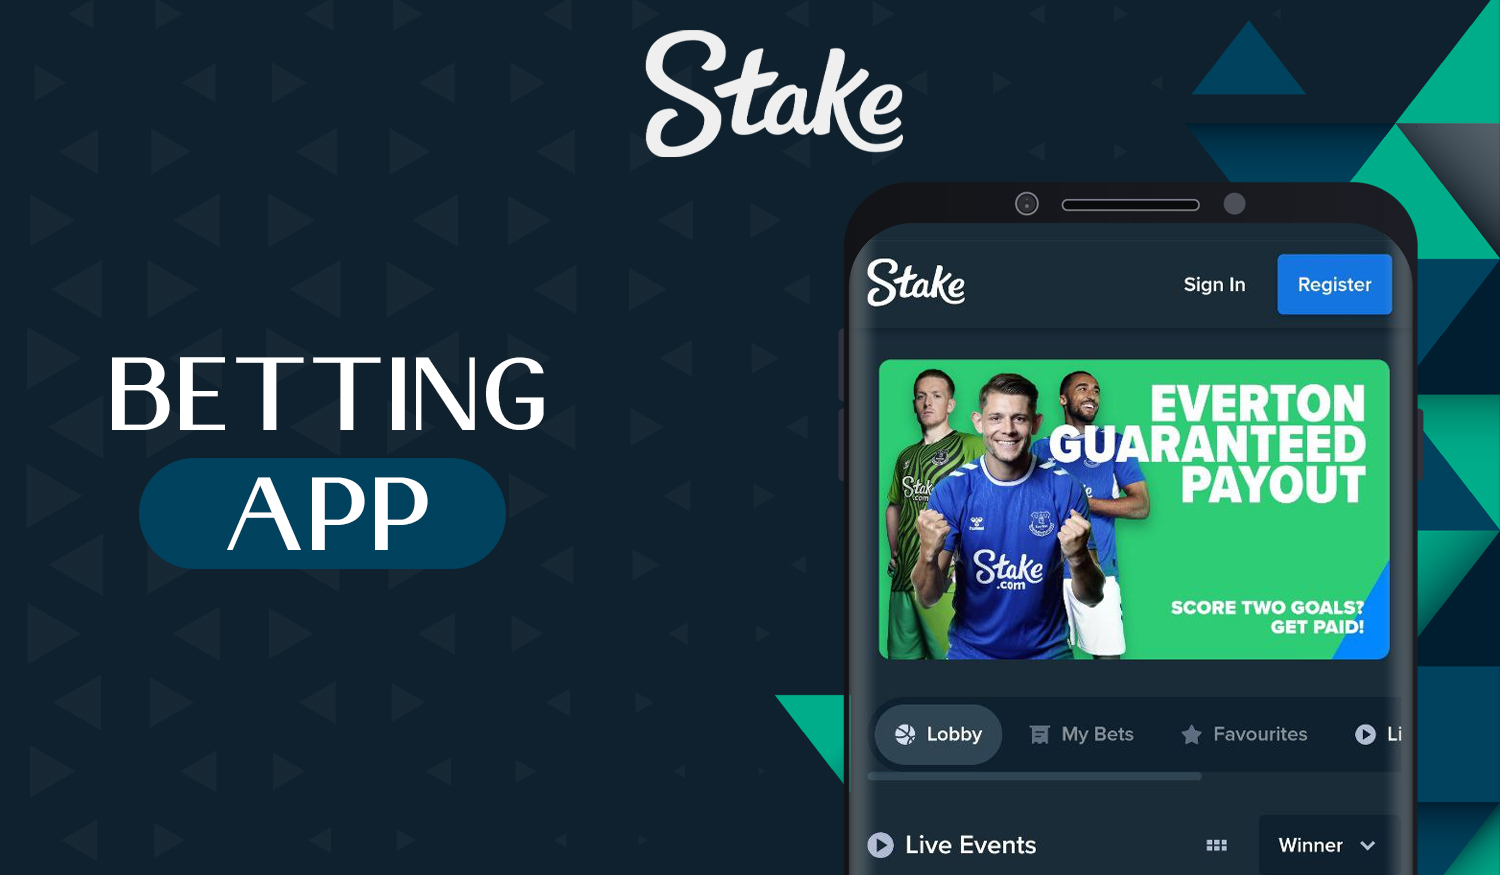 What functions of the web site are available on the Stake mobile app 